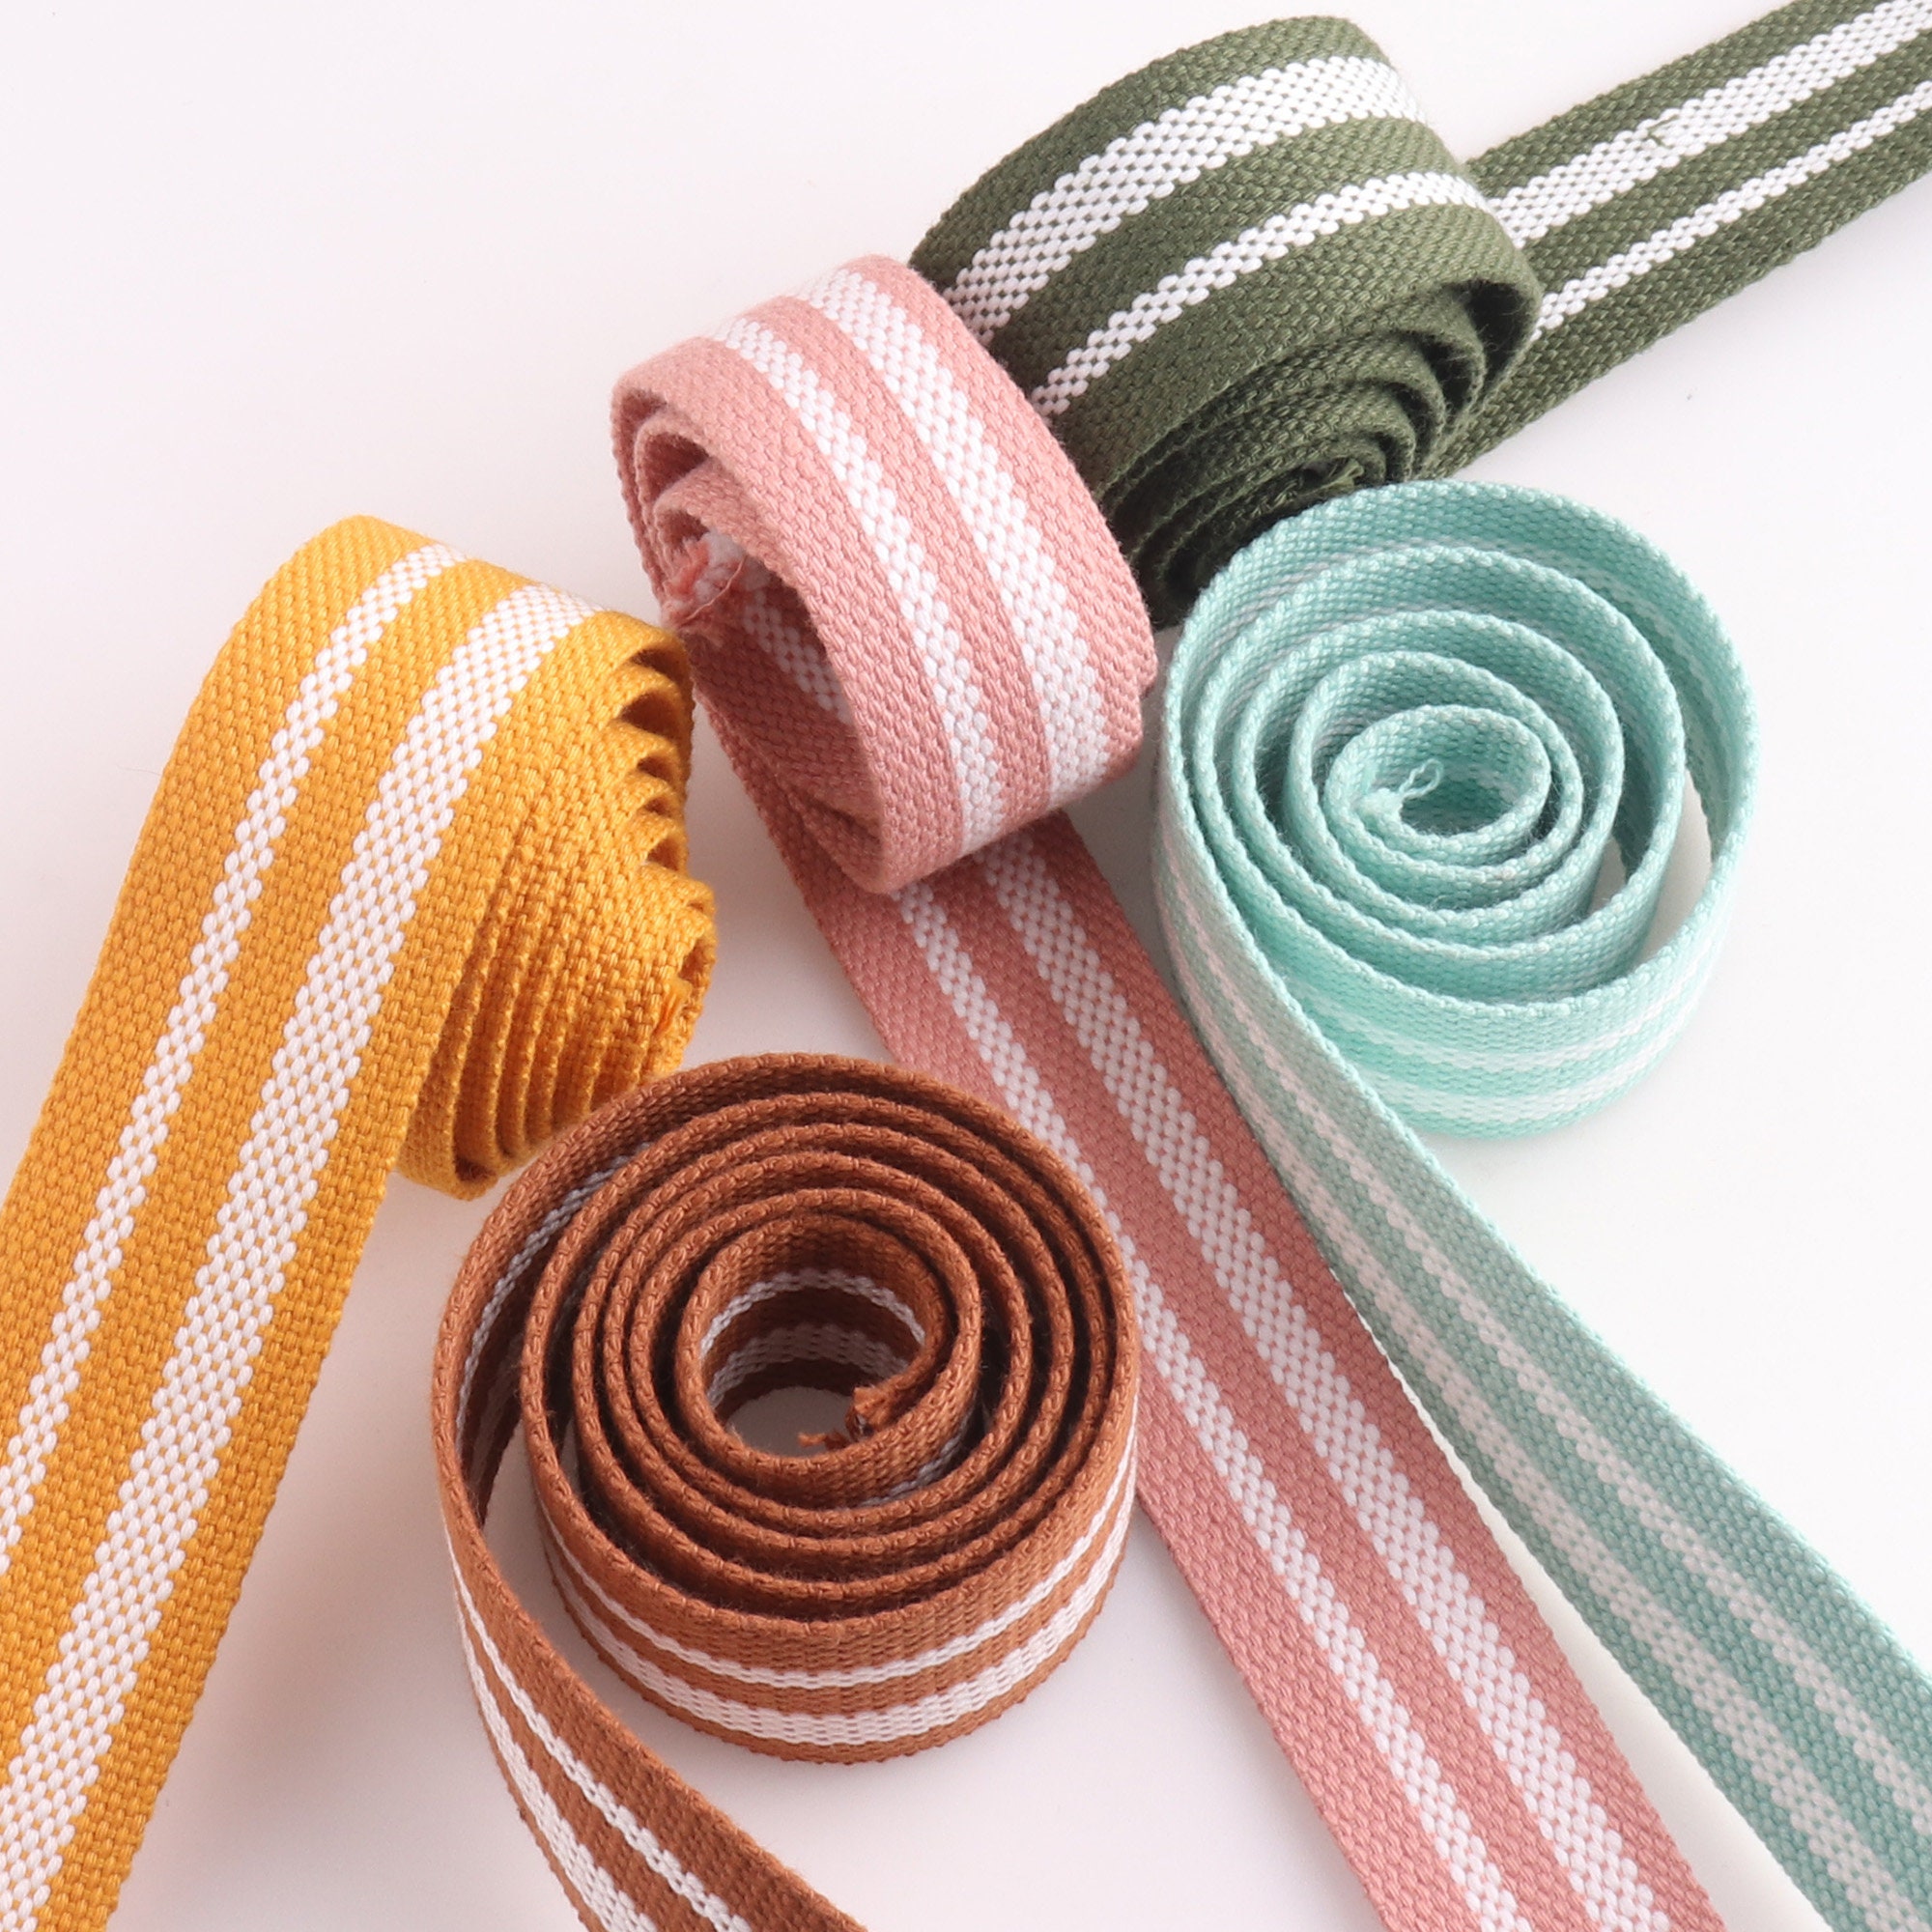 Abbaoww 11 Yards Natural Heavy Cotton Webbing 1.5 Inch for Sewing DIY Craft  Bags Making Outdoor Supplies (1.5 Inch)